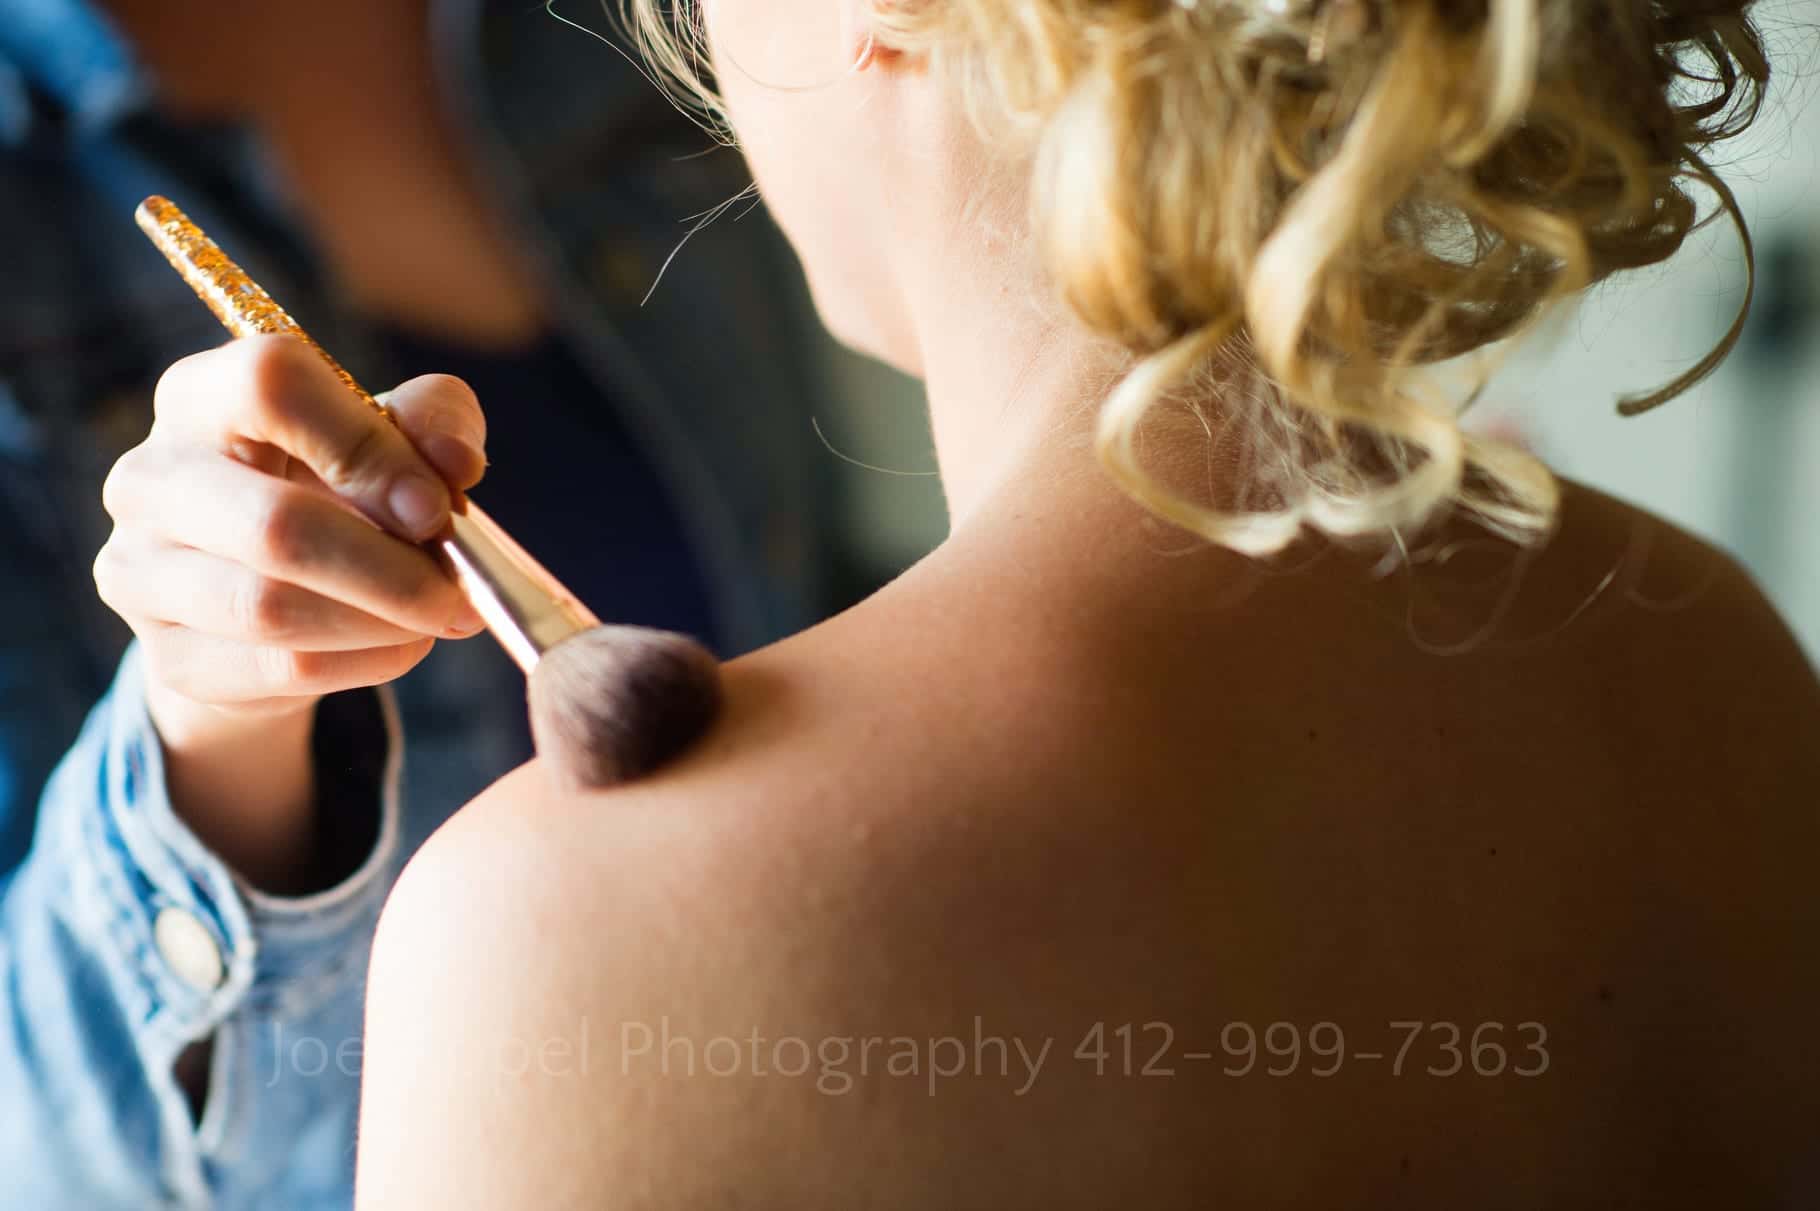 A bare shoulder gets a bit of makeup applied to it as a bride prepares for her wedding.